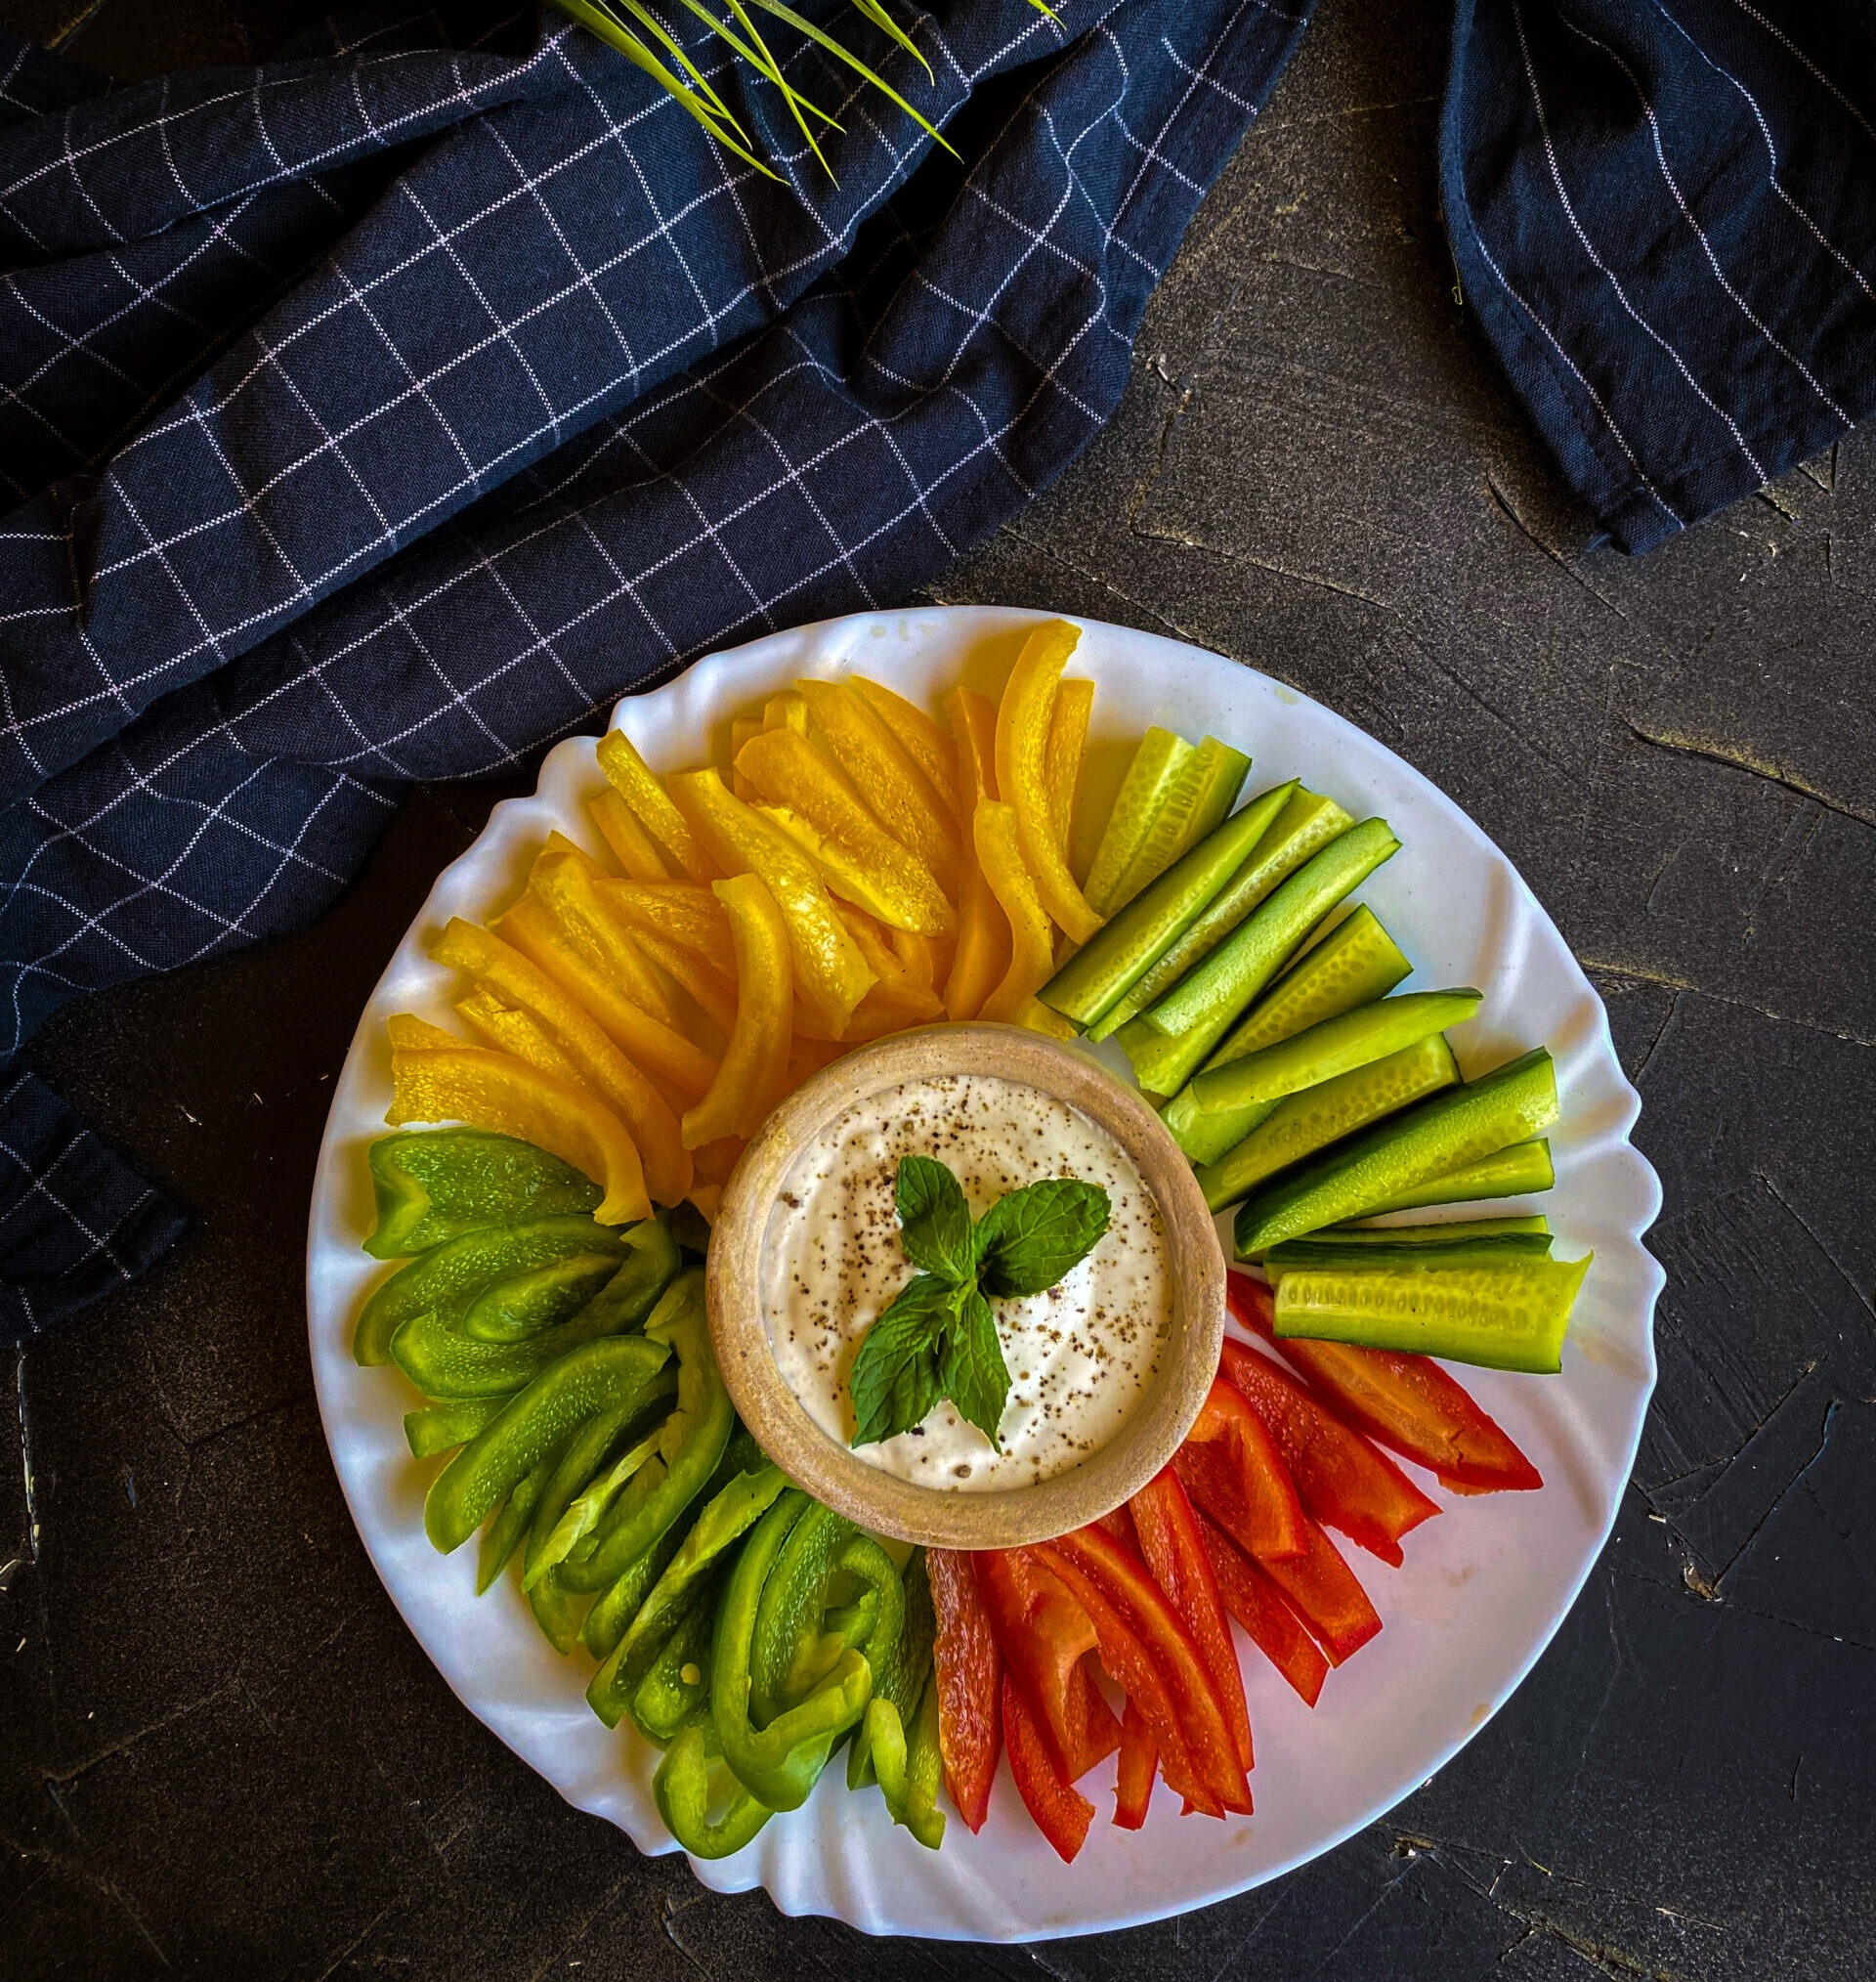 Tasty and Easy Healthy Garlicky Labneh Dip (Mayo Substitute)